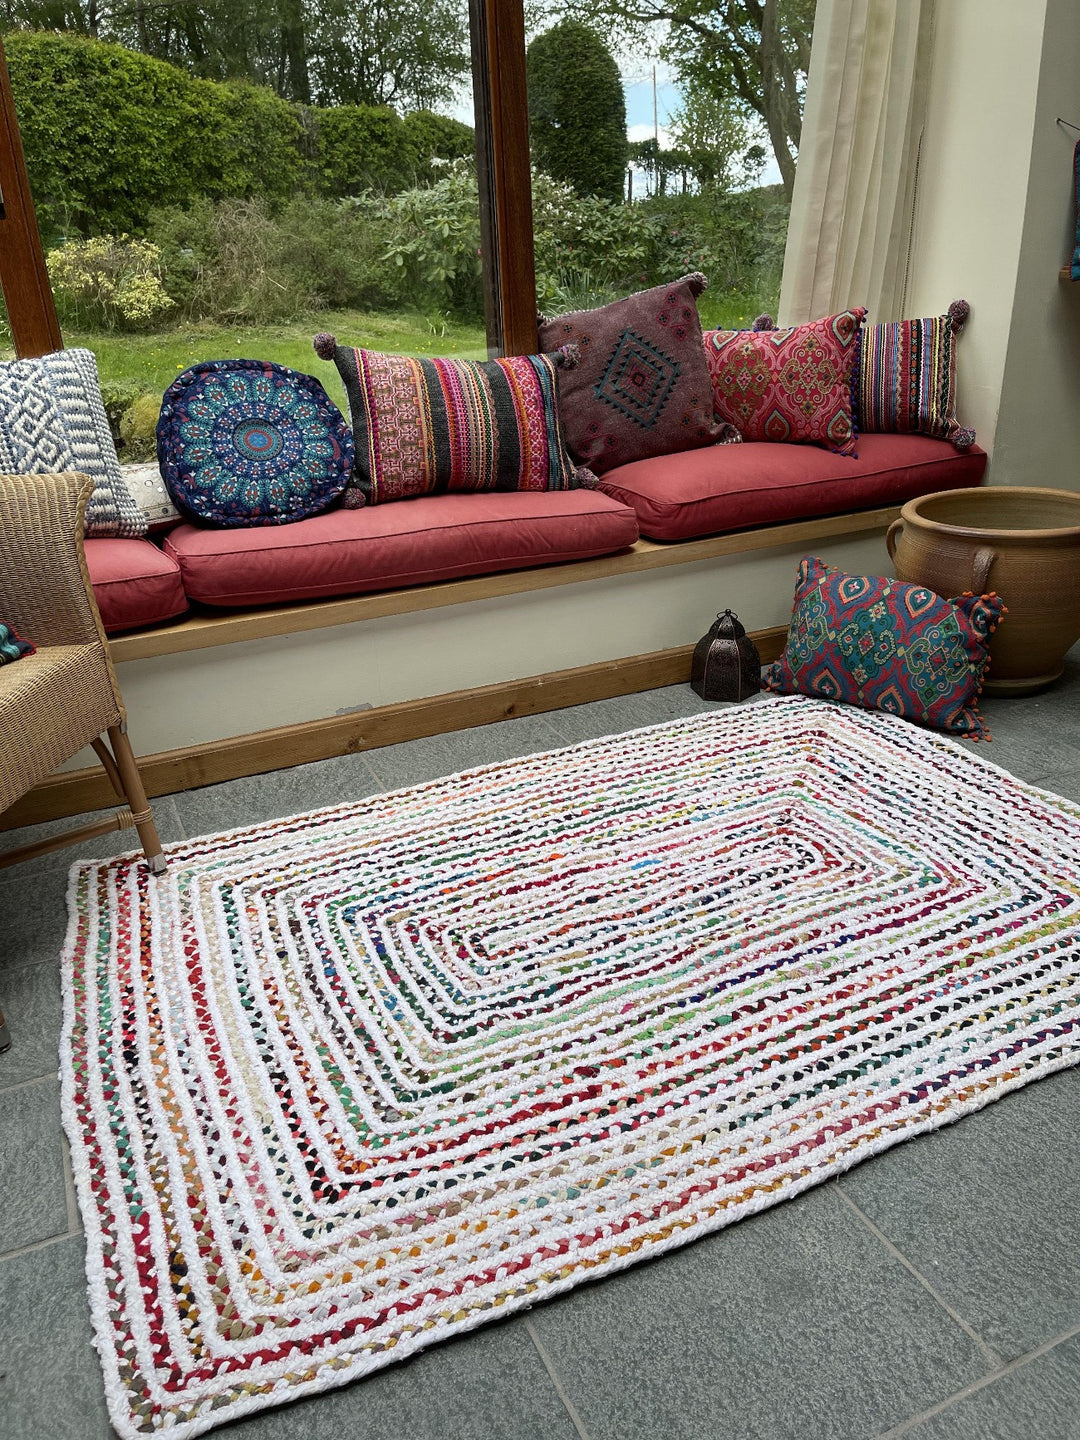 CARNIVAL Rectangular Bedroom Rug Ethical Source with Recycled Fabric - Second Nature Online